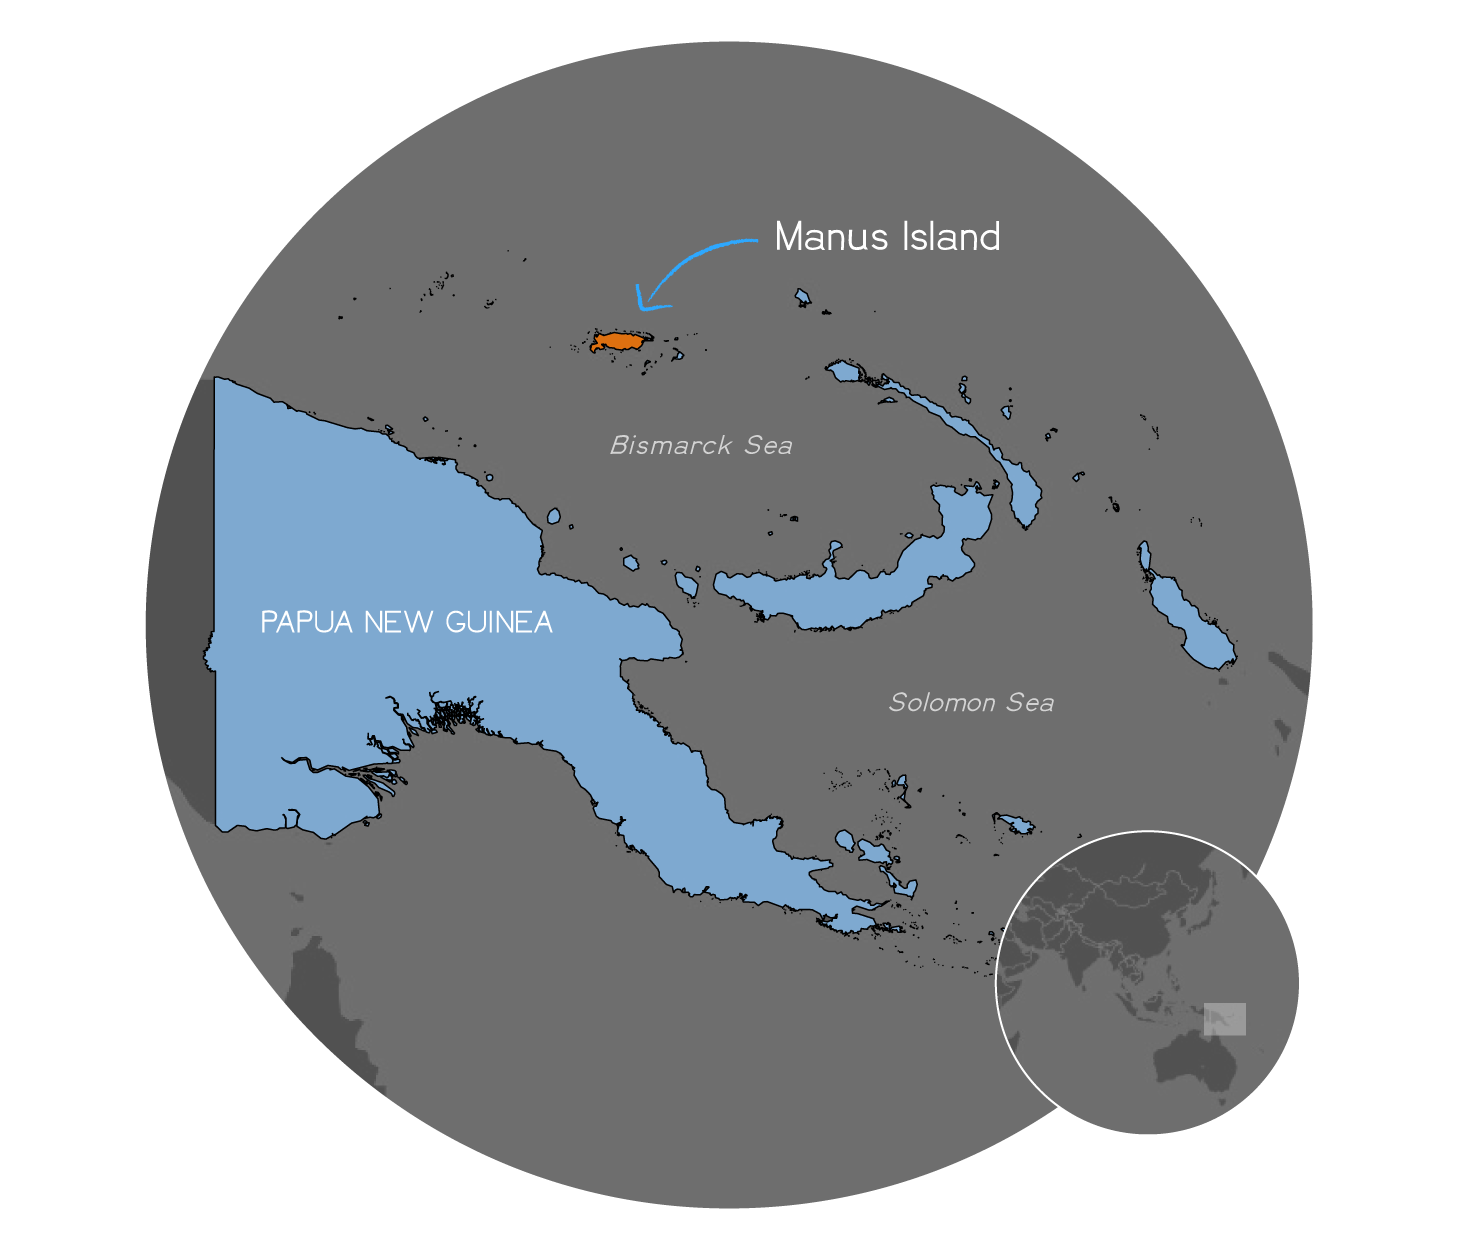 A map showing Papua New Guinea, with Manus Island highlighted to the north.